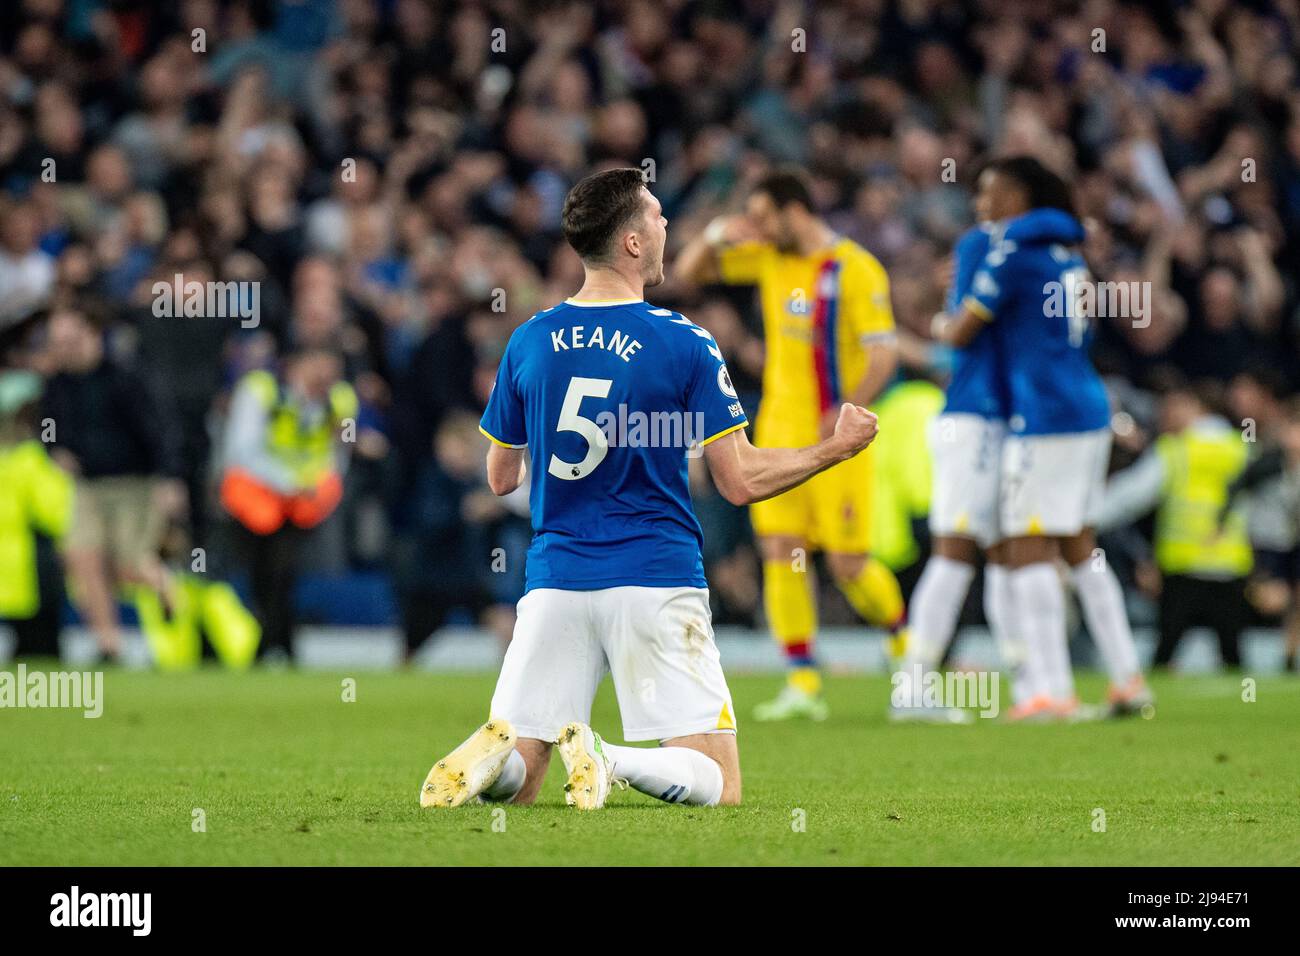 LIVERPOOL, ENGLAND - MAY 19: Michael Keane during the Premier League match between Everton and Crystal Palace at Goodison Park on May 19, 2022 in Liverpool, United Kingdom. (Photo by Sebastian Frej) Stock Photo